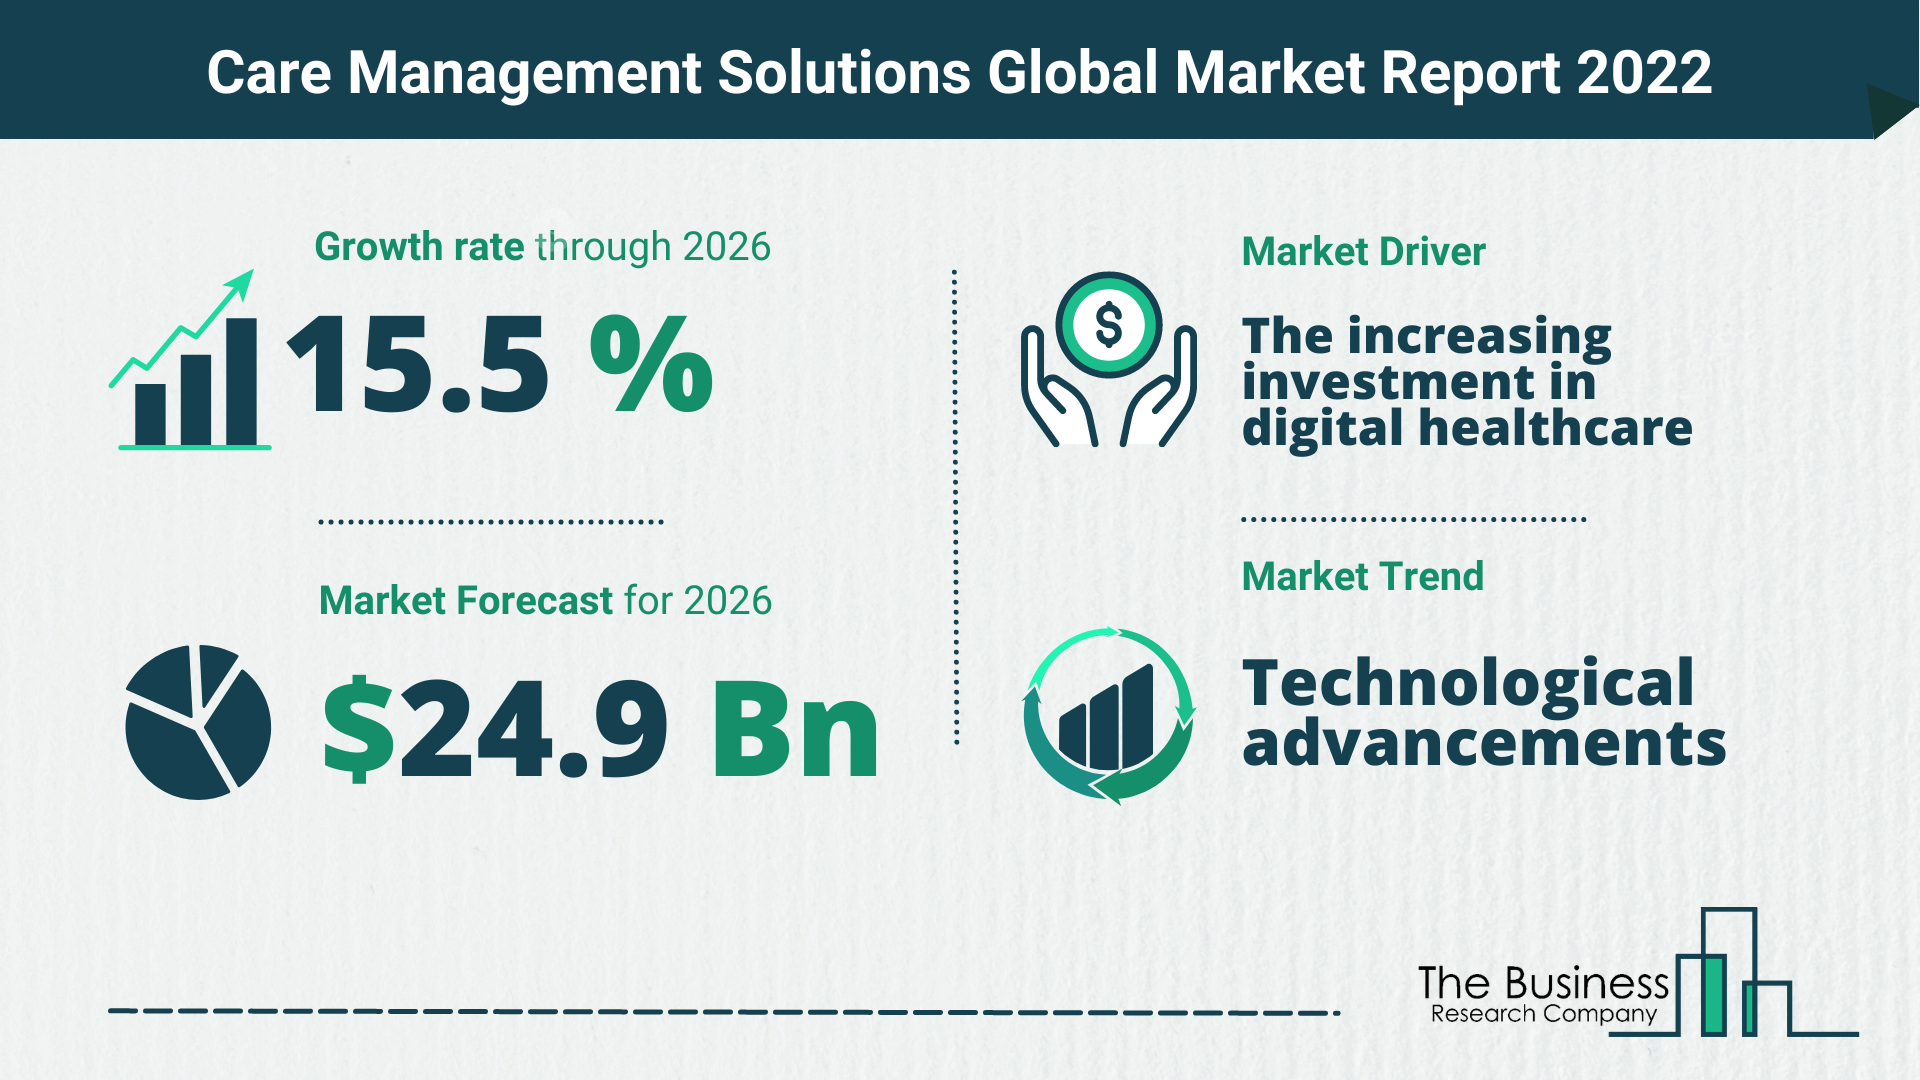 The Care Management Solutions Market Share, Market Size, And Growth Rate 2022